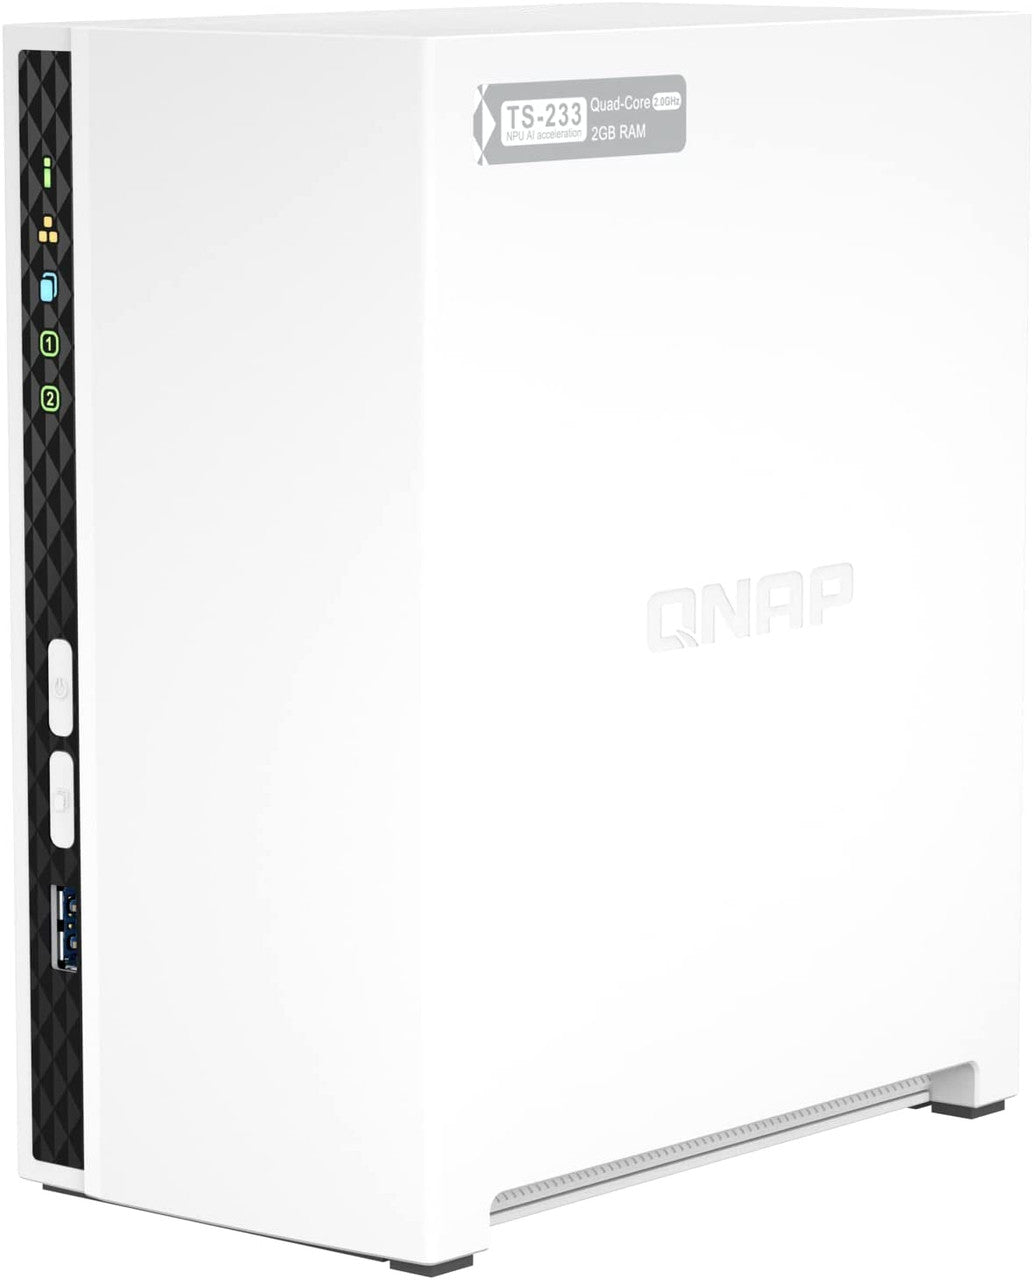 QNAP TS-233 2-Bay Desktop NAS with a 24TB (2 x 12TB) of Seagate Ironwolf NAS Drives Fully Assembled and Tested